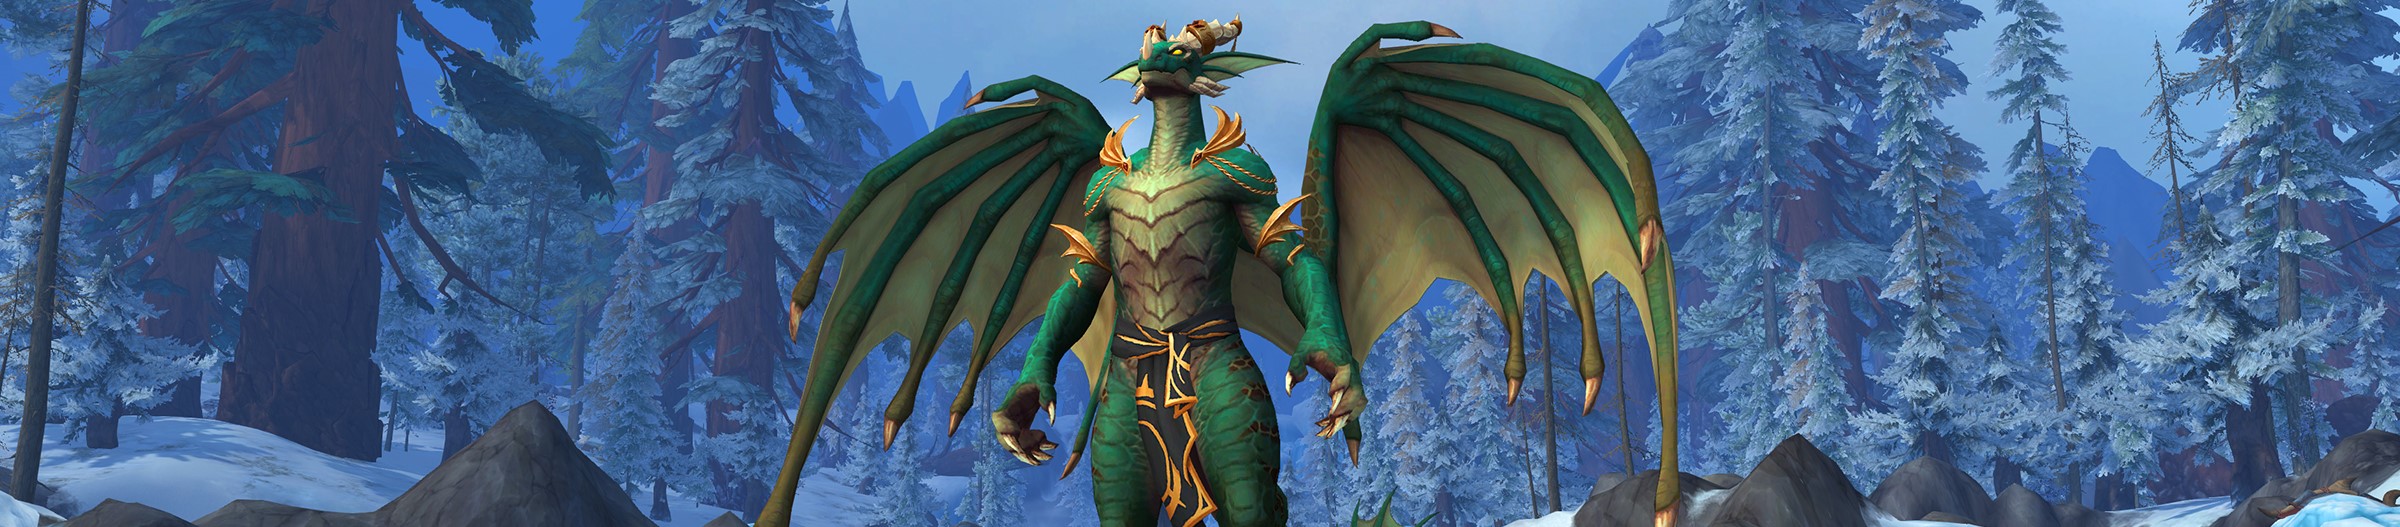 Soaring in Azeroth: Pre-Nerf Dracthyr Racial Challenges in the Old World thumbnail